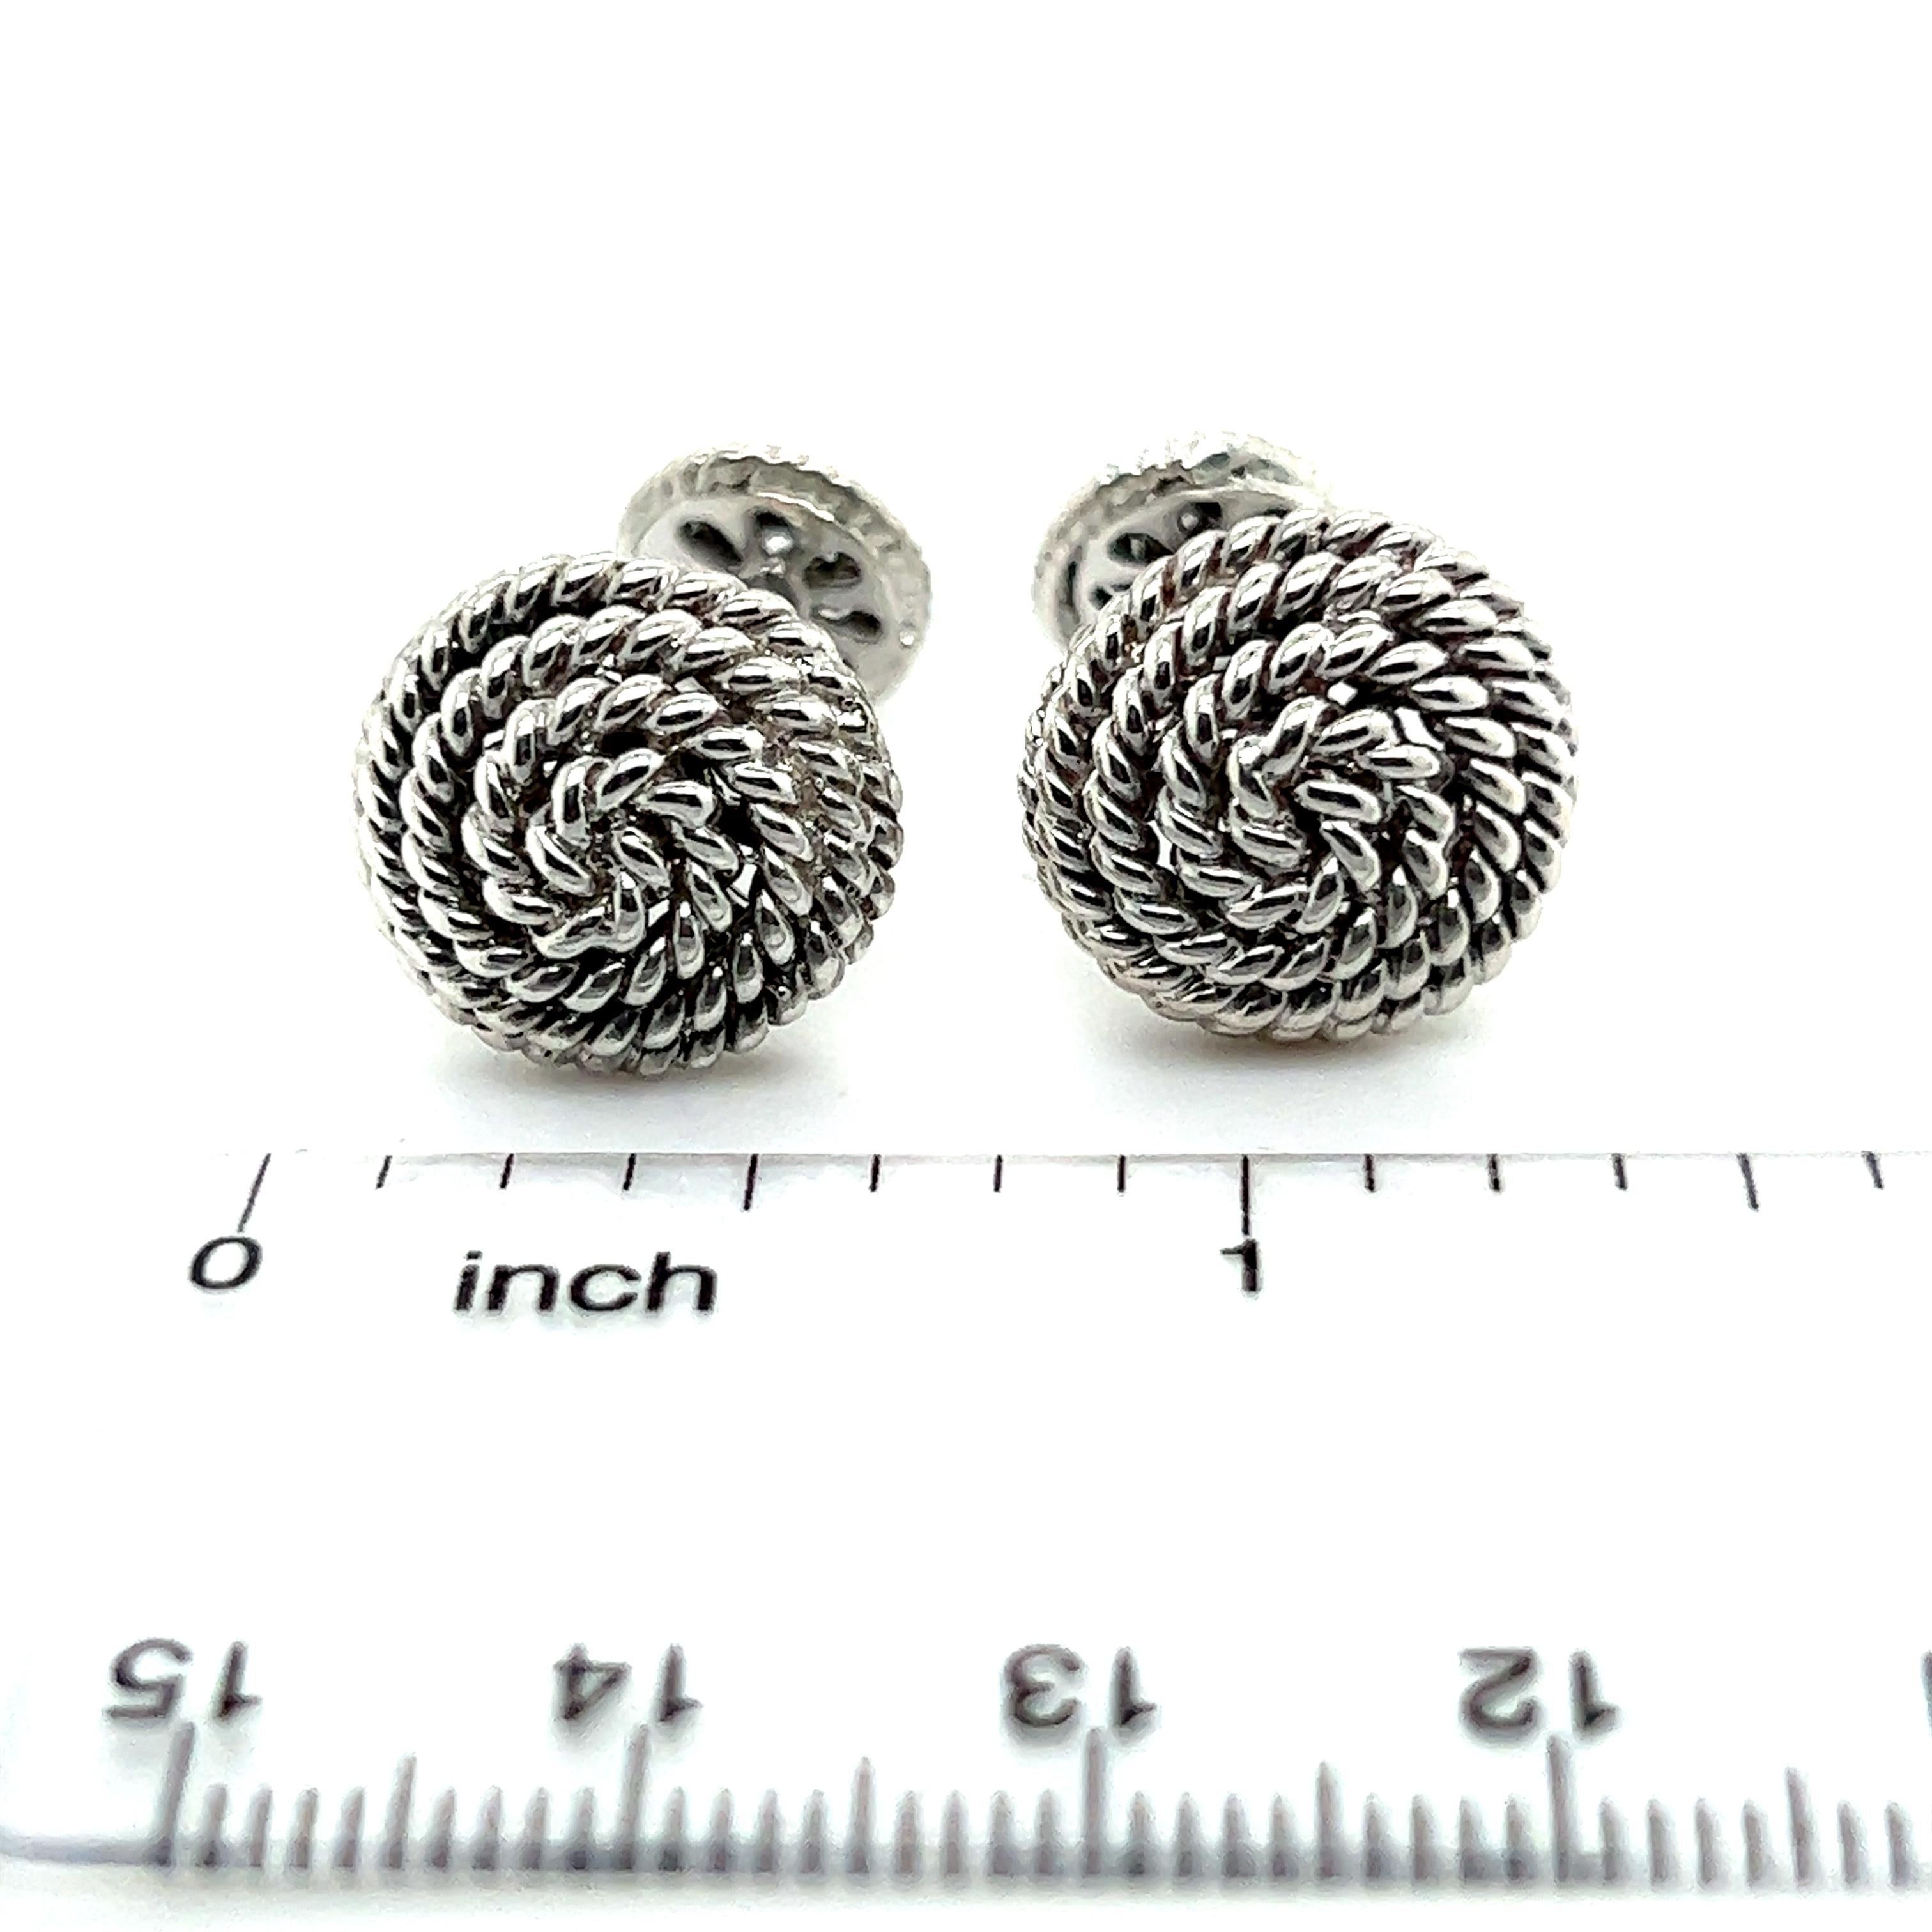 Authentic Tiffany & Co Estate Round Roped Cufflinks Sterling Silver TIF371

TRUSTED SELLER SINCE 2002

PLEASE SEE OUR HUNDREDS OF POSITIVE FEEDBACKS FROM OUR CLIENTS!!

FREE SHIPPING

DETAILS
Cufflinks: Round Roped 
Weight: 10 Grams
Metal: Sterling